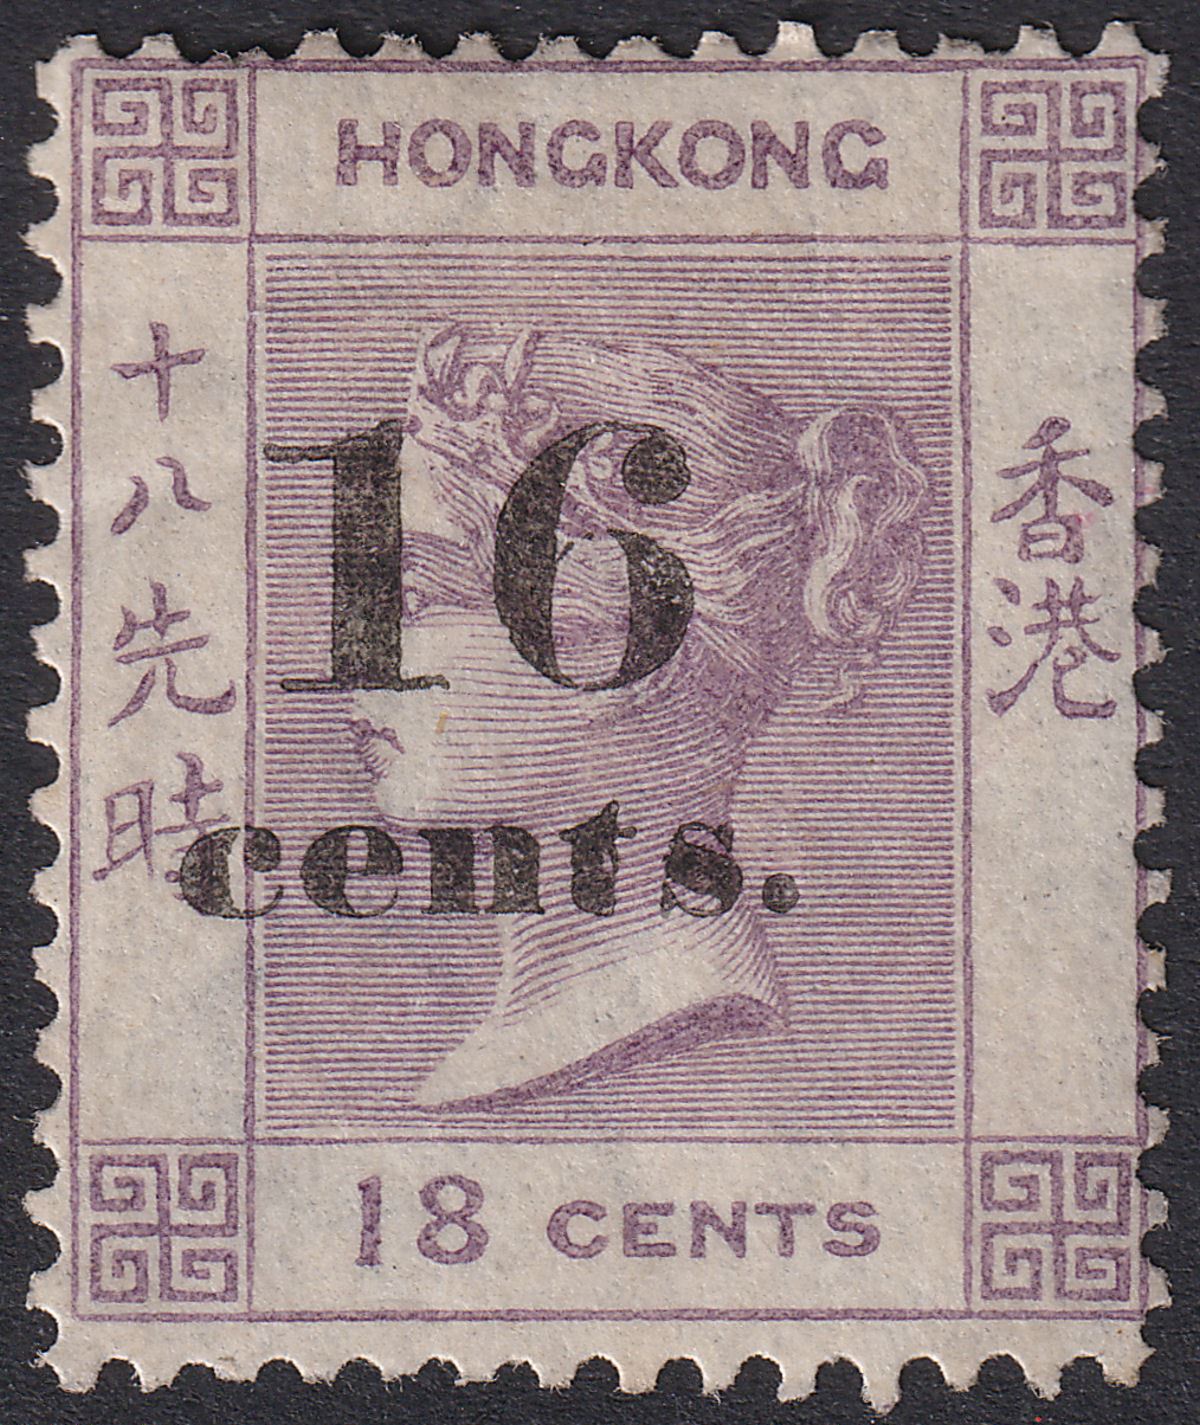 Hong Kong 1877 QV 16c on 18c Lilac Surcharge Unused SG20 cat £2250 as mint